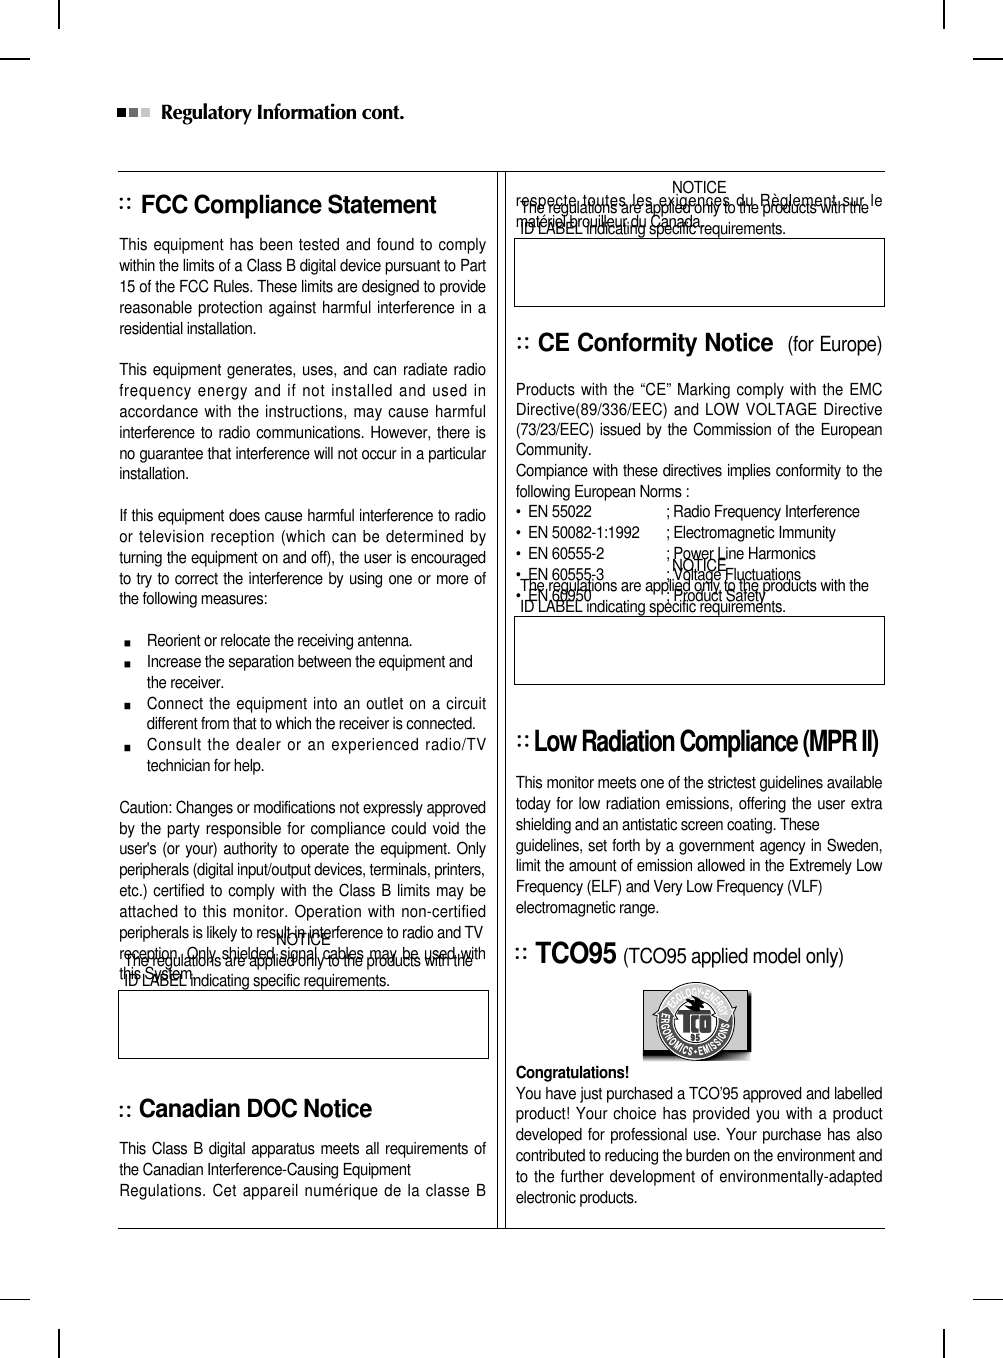 Regulatory Information cont. FCC Compliance StatementThis equipment has been tested and found to complywithin the limits of a Class B digital device pursuant to Part15 of the FCC Rules. These limits are designed to providereasonable protection against harmful interference in aresidential installation.This equipment generates, uses, and can radiate radiofrequency energy and if not installed and used inaccordance with the instructions, may cause harmfulinterference to radio communications. However, there isno guarantee that interference will not occur in a particularinstallation.If this equipment does cause harmful interference to radioor television reception (which can be determined byturning the equipment on and off), the user is encouragedto try to correct the interference by using one or more ofthe following measures:Reorient or relocate the receiving antenna.Increase the separation between the equipment and the receiver.Connect the equipment into an outlet on a circuitdifferent from that to which the receiver is connected.Consult the dealer or an experienced radio/TVtechnician for help.Caution: Changes or modifications not expressly approvedby the party responsible for compliance could void theuser&apos;s (or your) authority to operate the equipment. Onlyperipherals (digital input/output devices, terminals, printers,etc.) certified to comply with the Class B limits may beattached to this monitor. Operation with non-certifiedperipherals is likely to result in interference to radio and TV reception. Only shielded signal cables may be used withthis System.Canadian DOC NoticeThis Class B digital apparatus meets all requirements ofthe Canadian Interference-Causing Equipment Regulations. Cet appareil numérique de la classe Brespecte toutes les exigences du Règlement sur lematériel brouilleur du Canada.CE Conformity Notice (for Europe)Products with the “CE” Marking comply with the EMCDirective(89/336/EEC) and LOW VOLTAGE Directive(73/23/EEC) issued by the Commission of the EuropeanCommunity.Compiance with these directives implies conformity to thefollowing European Norms :•  EN 55022 ; Radio Frequency Interference•  EN 50082-1:1992 ; Electromagnetic Immunity•  EN 60555-2 ; Power Line Harmonics•  EN 60555-3 ; Voltage Fluctuations•  EN 60950 ; Product SafetyLow Radiation Compliance (MPR II)This monitor meets one of the strictest guidelines availabletoday for low radiation emissions, offering the user extrashielding and an antistatic screen coating. Theseguidelines, set forth by a government agency in Sweden,limit the amount of emission allowed in the Extremely LowFrequency (ELF) and Very Low Frequency (VLF)electromagnetic range.TCO95 (TCO95 applied model only)Congratulations! You have just purchased a TCO’95 approved and labelledproduct! Your choice has provided you with a productdeveloped for professional use. Your purchase has alsocontributed to reducing the burden on the environment andto the further development of environmentally-adaptedelectronic products.NOTICEThe regulations are applied only to the products with theID LABEL indicating specific requirements.NOTICEThe regulations are applied only to the products with theID LABEL indicating specific requirements.NOTICEThe regulations are applied only to the products with theID LABEL indicating specific requirements.